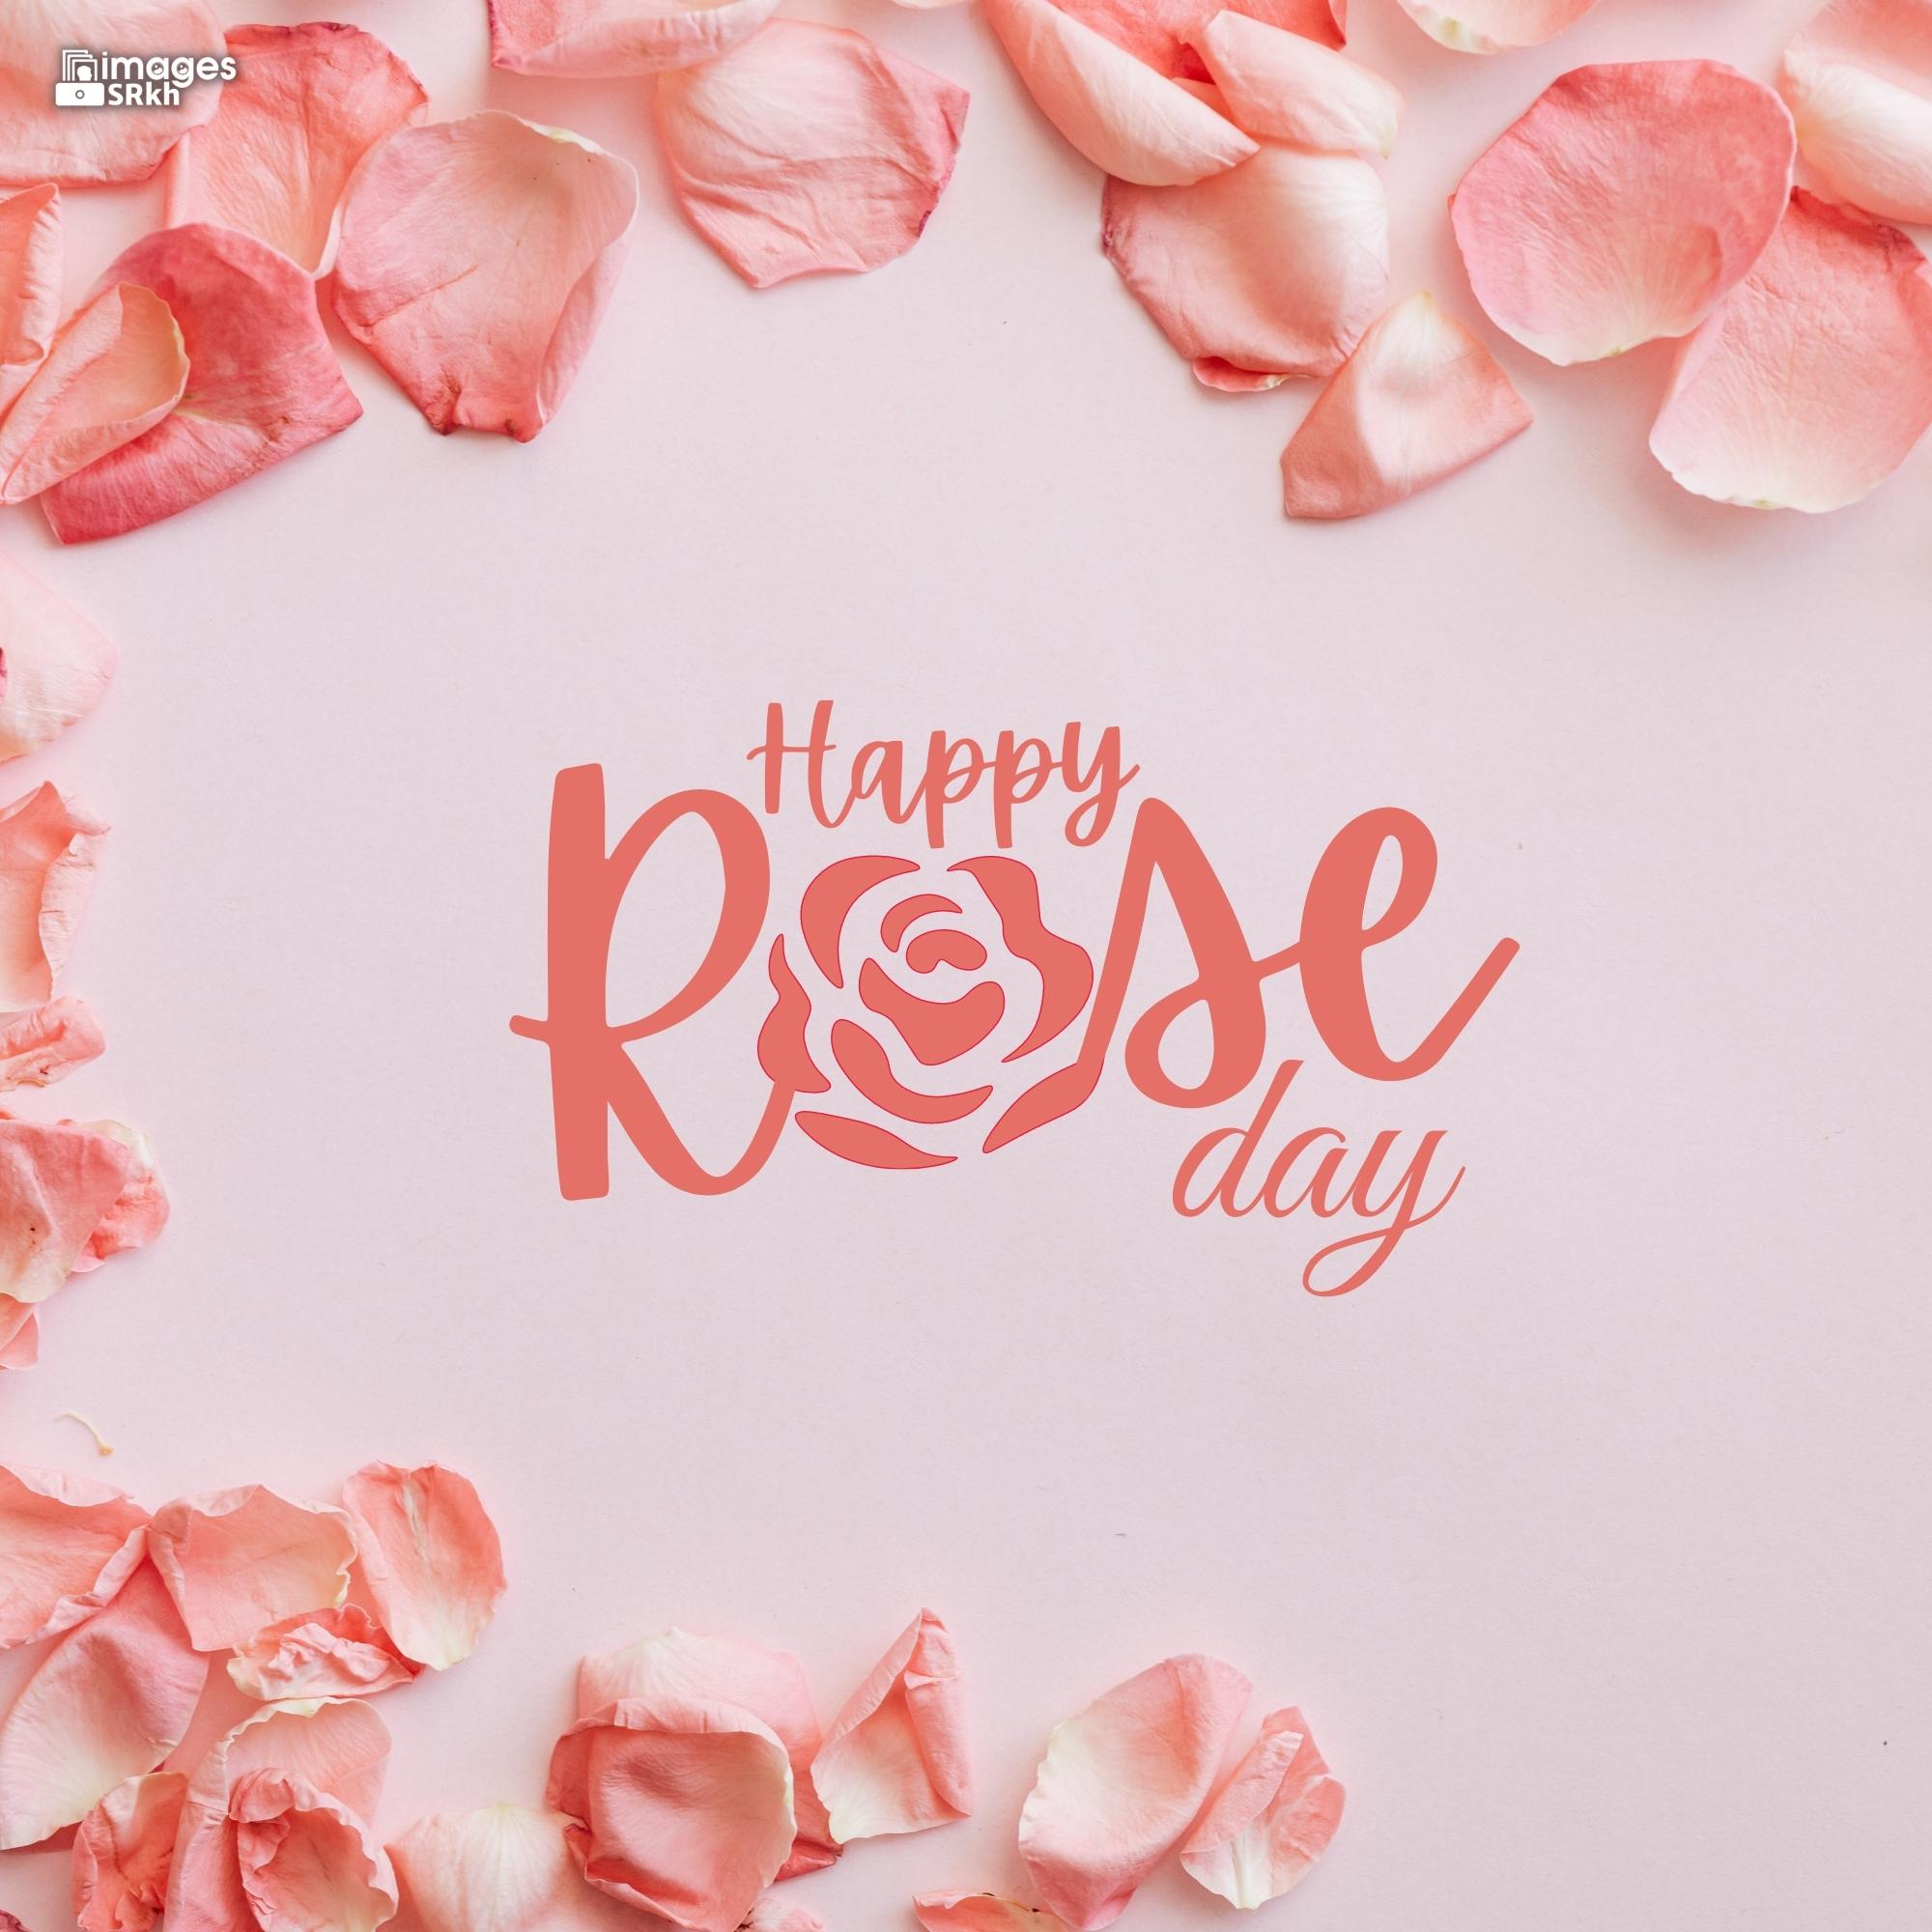 Happy Rose Day Image Hd Download (14)